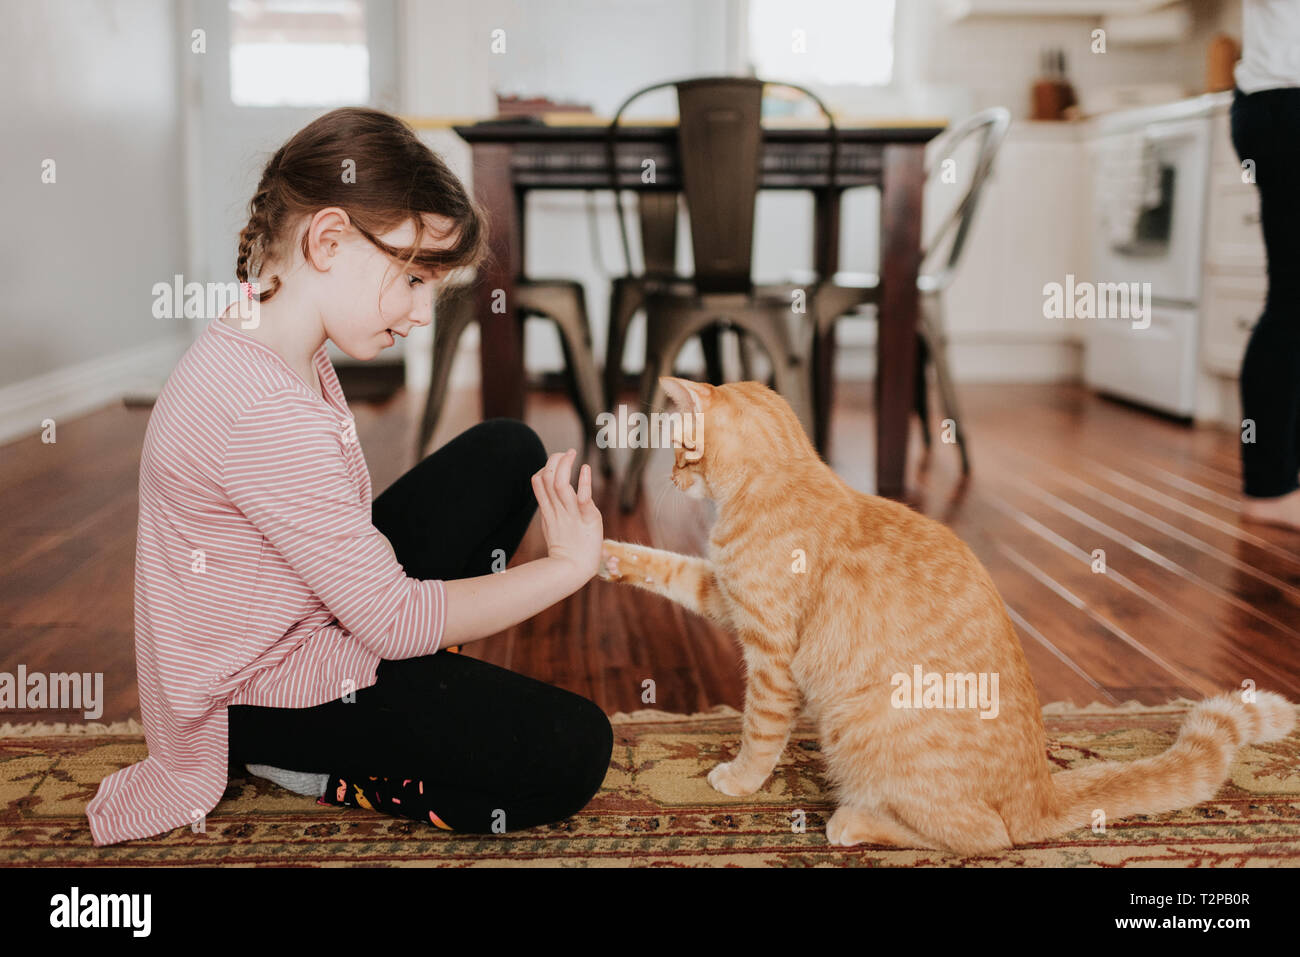 Girl playing with cat at home Stock Photo